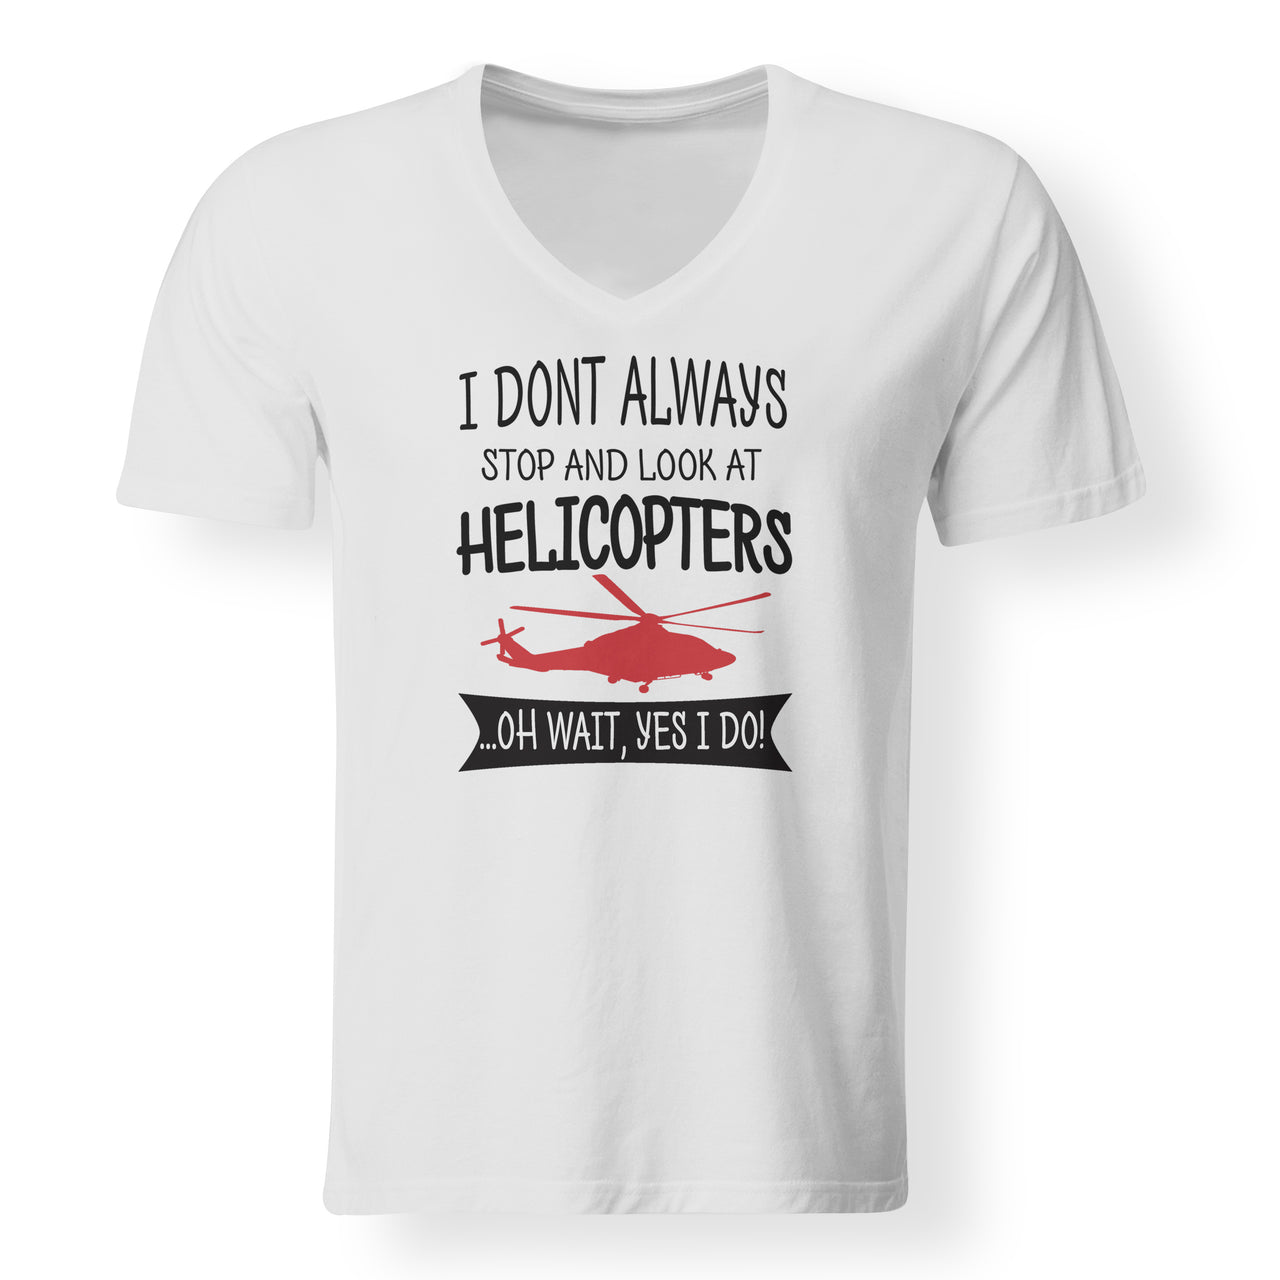 I Don't Always Stop and Look at Helicopters Designed V-Neck T-Shirts